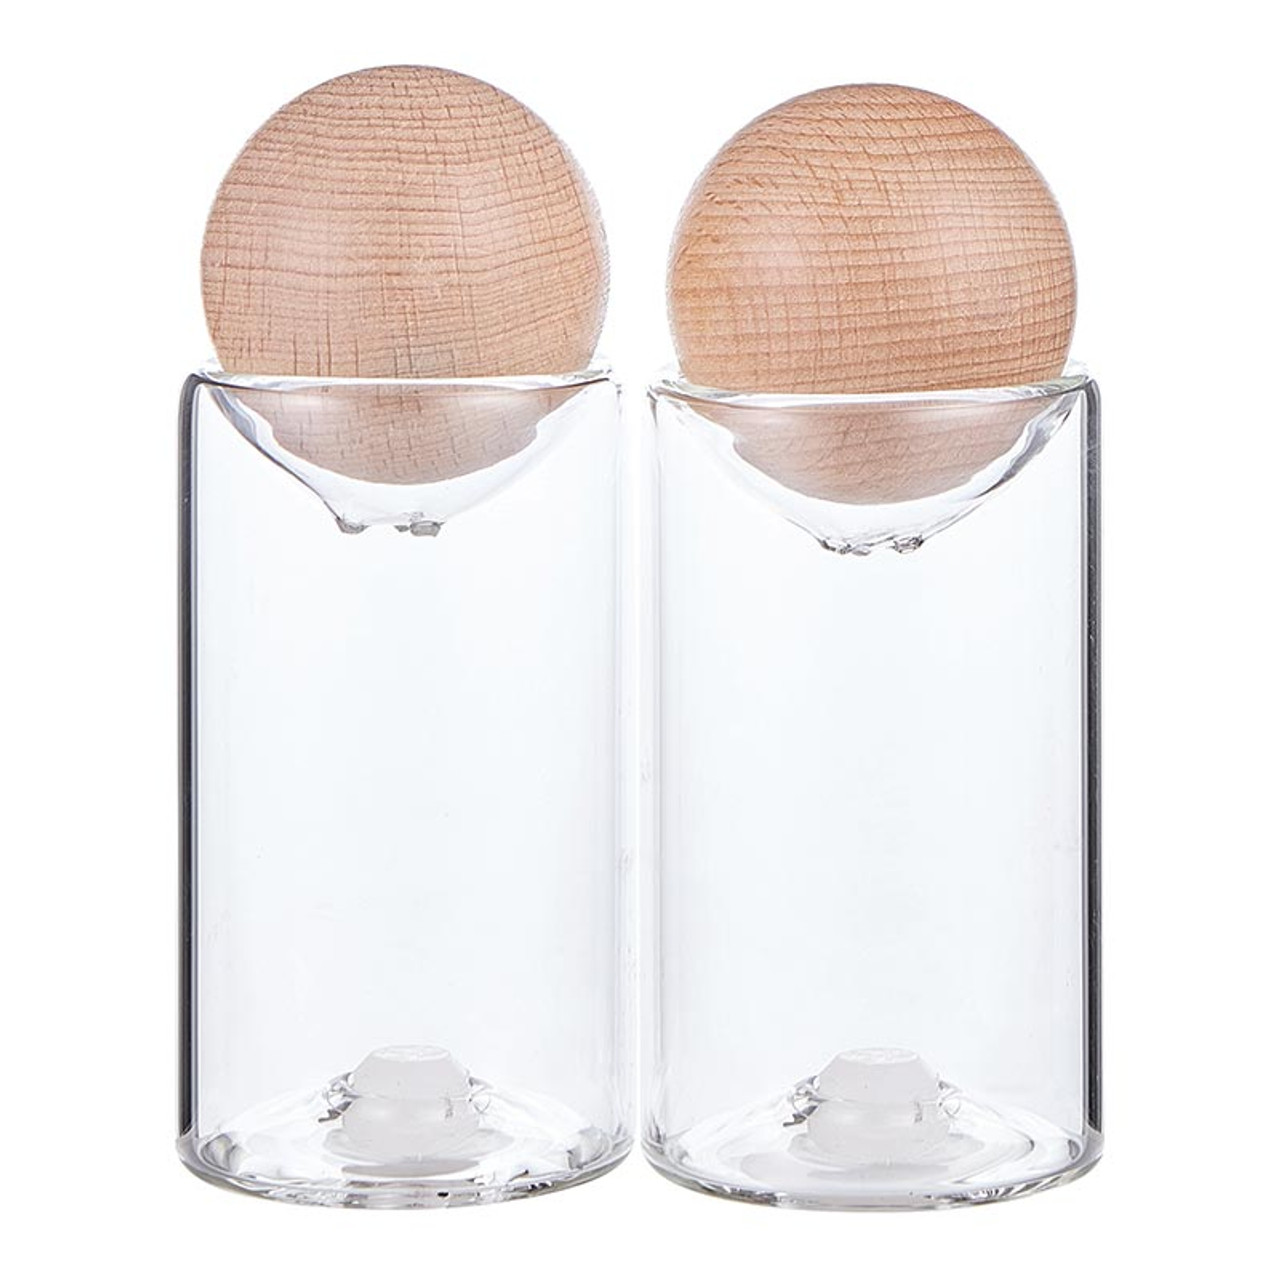 Marble Salt & Pepper Shakers (Set of 2) – McGee & Co.